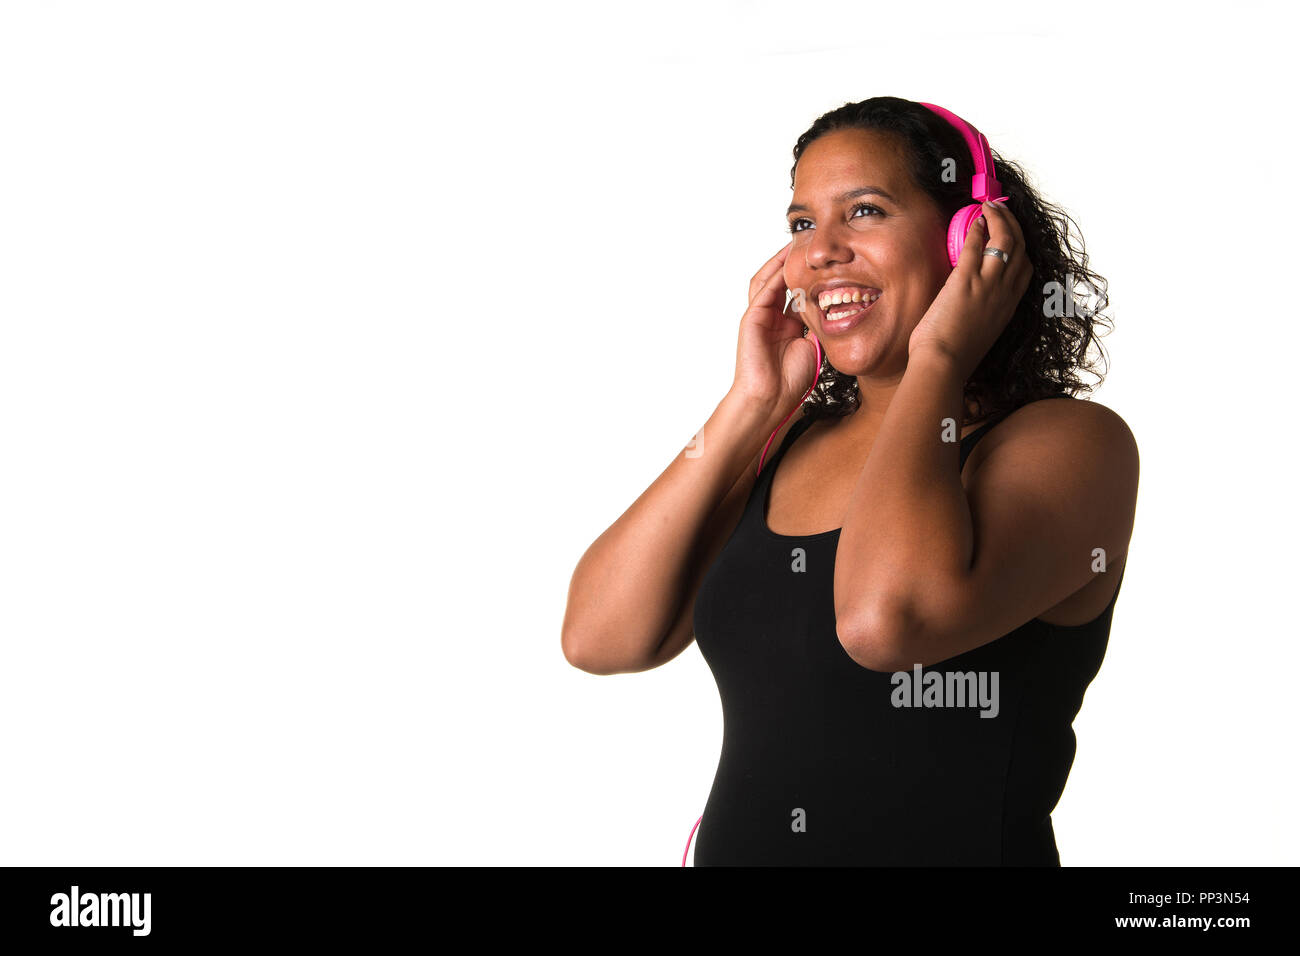 Young pretty black woman listening to music on a pink headphone seen from the side isolated on a white background Stock Photo